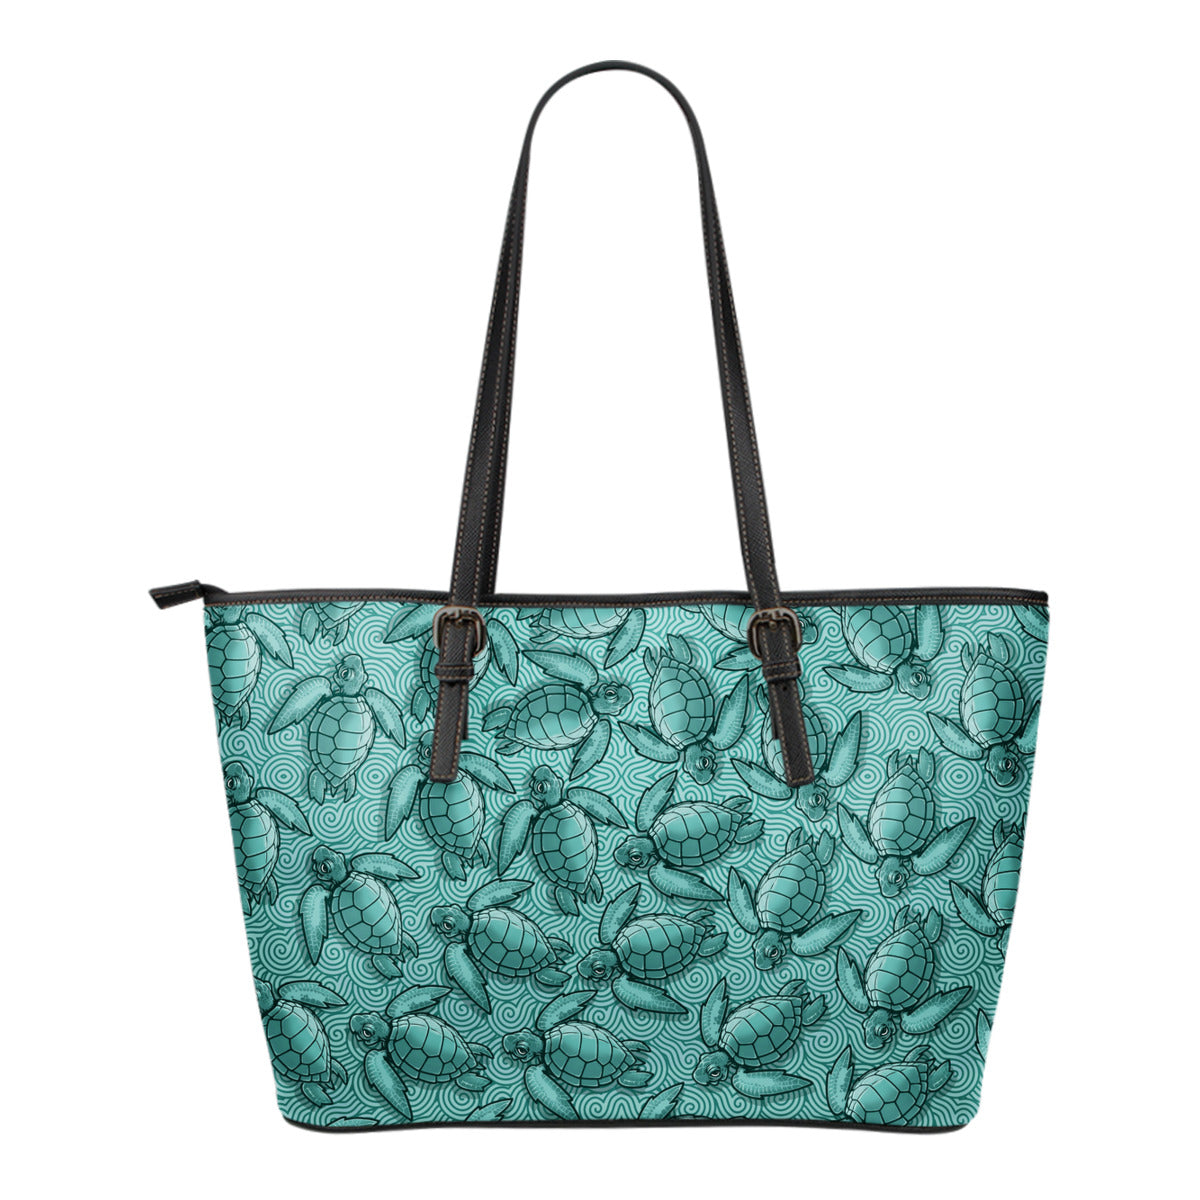 Turtle Swirl Small Leather Tote Bag - Teal